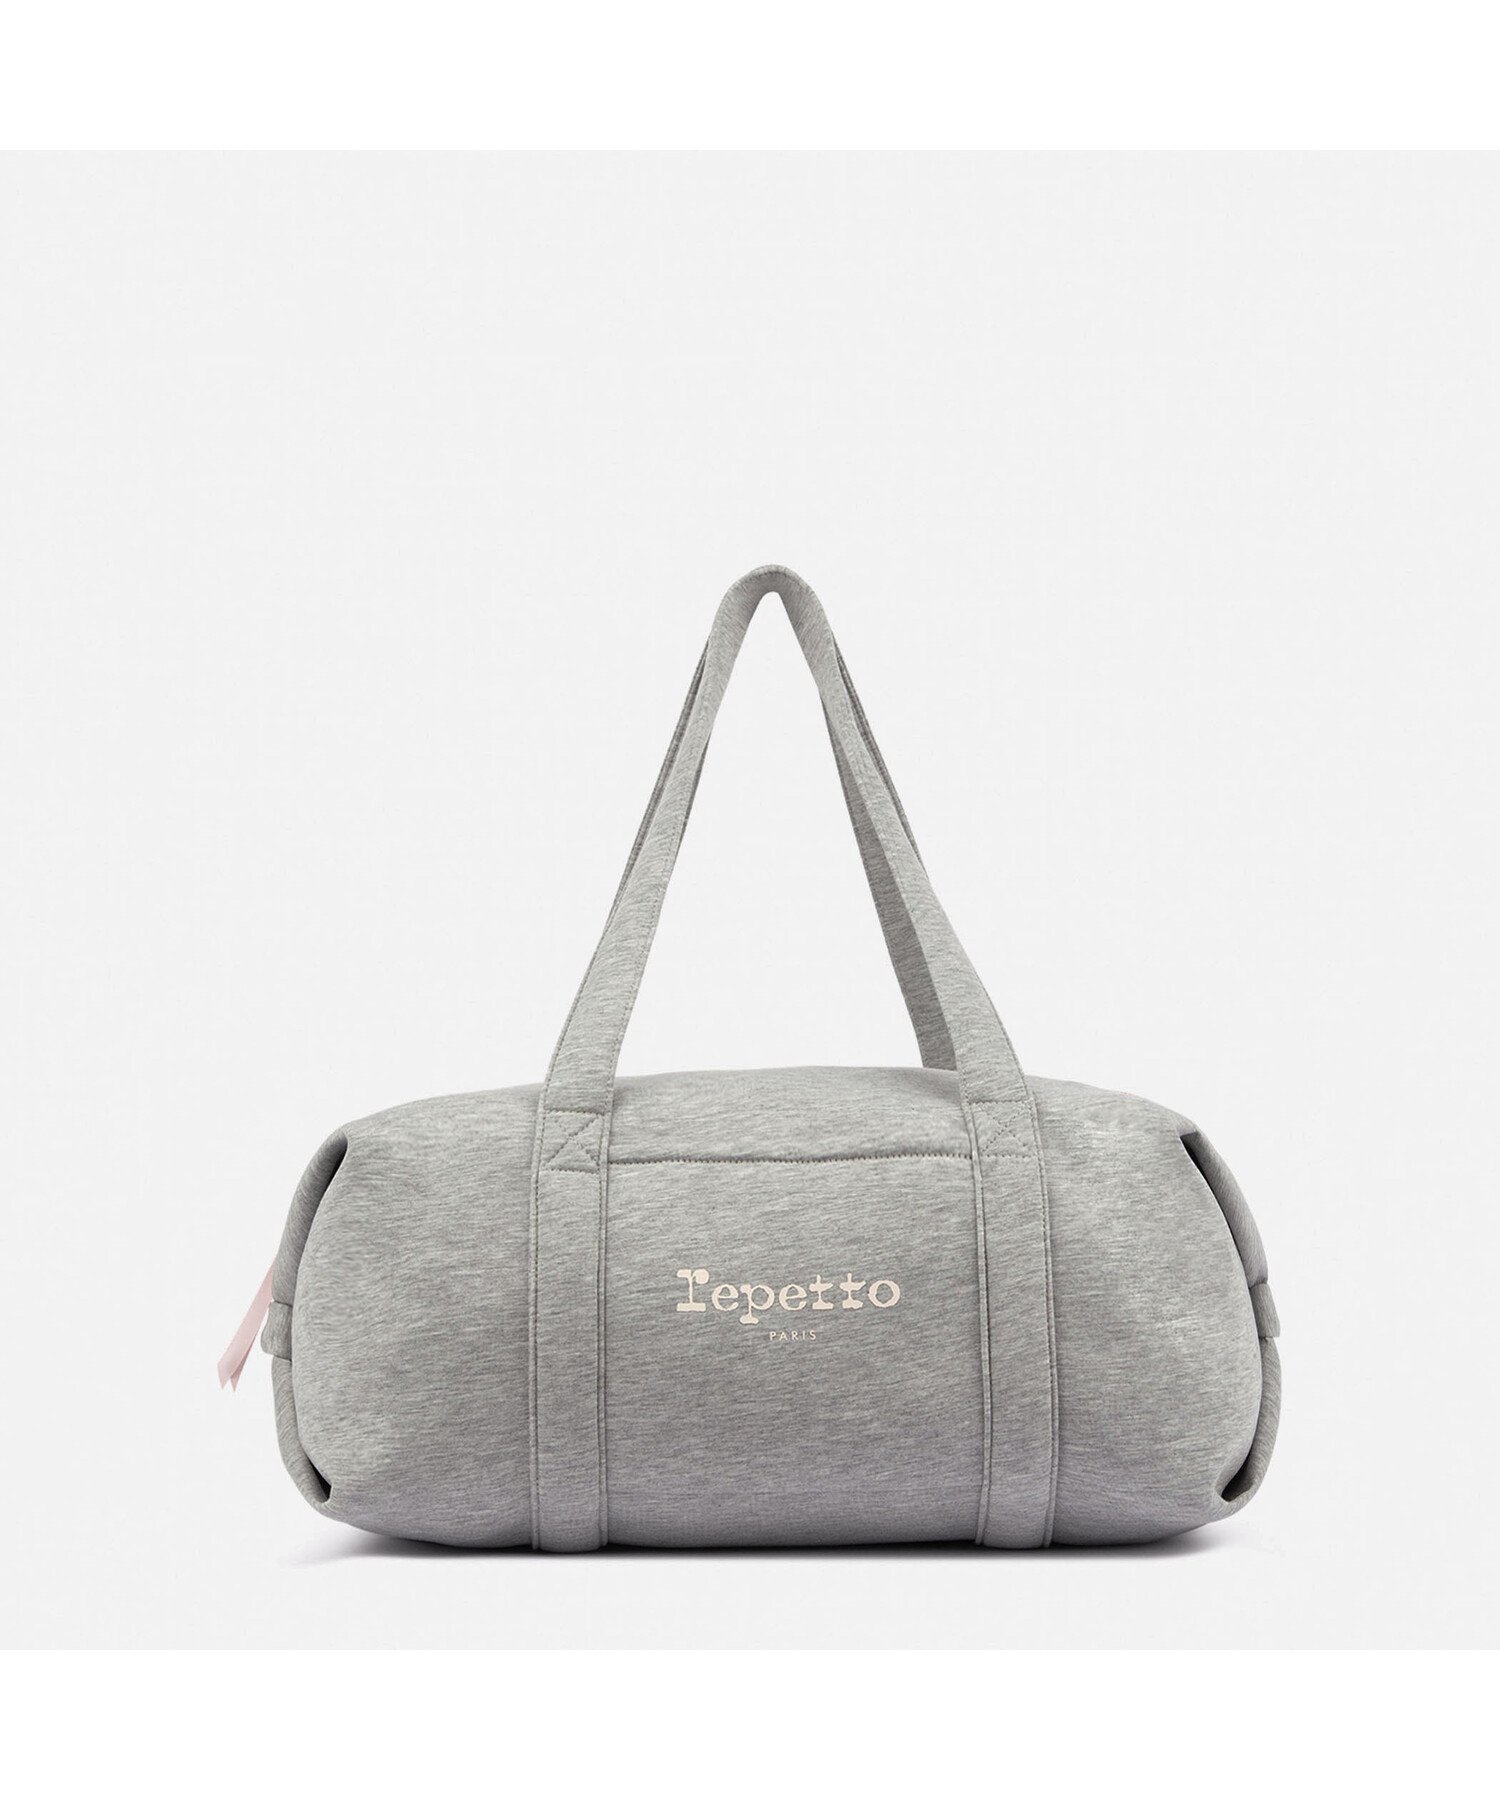 【SALE／20 OFF】Repetto Duffle bag size L レペット バッグ その他のバッグ【送料無料】